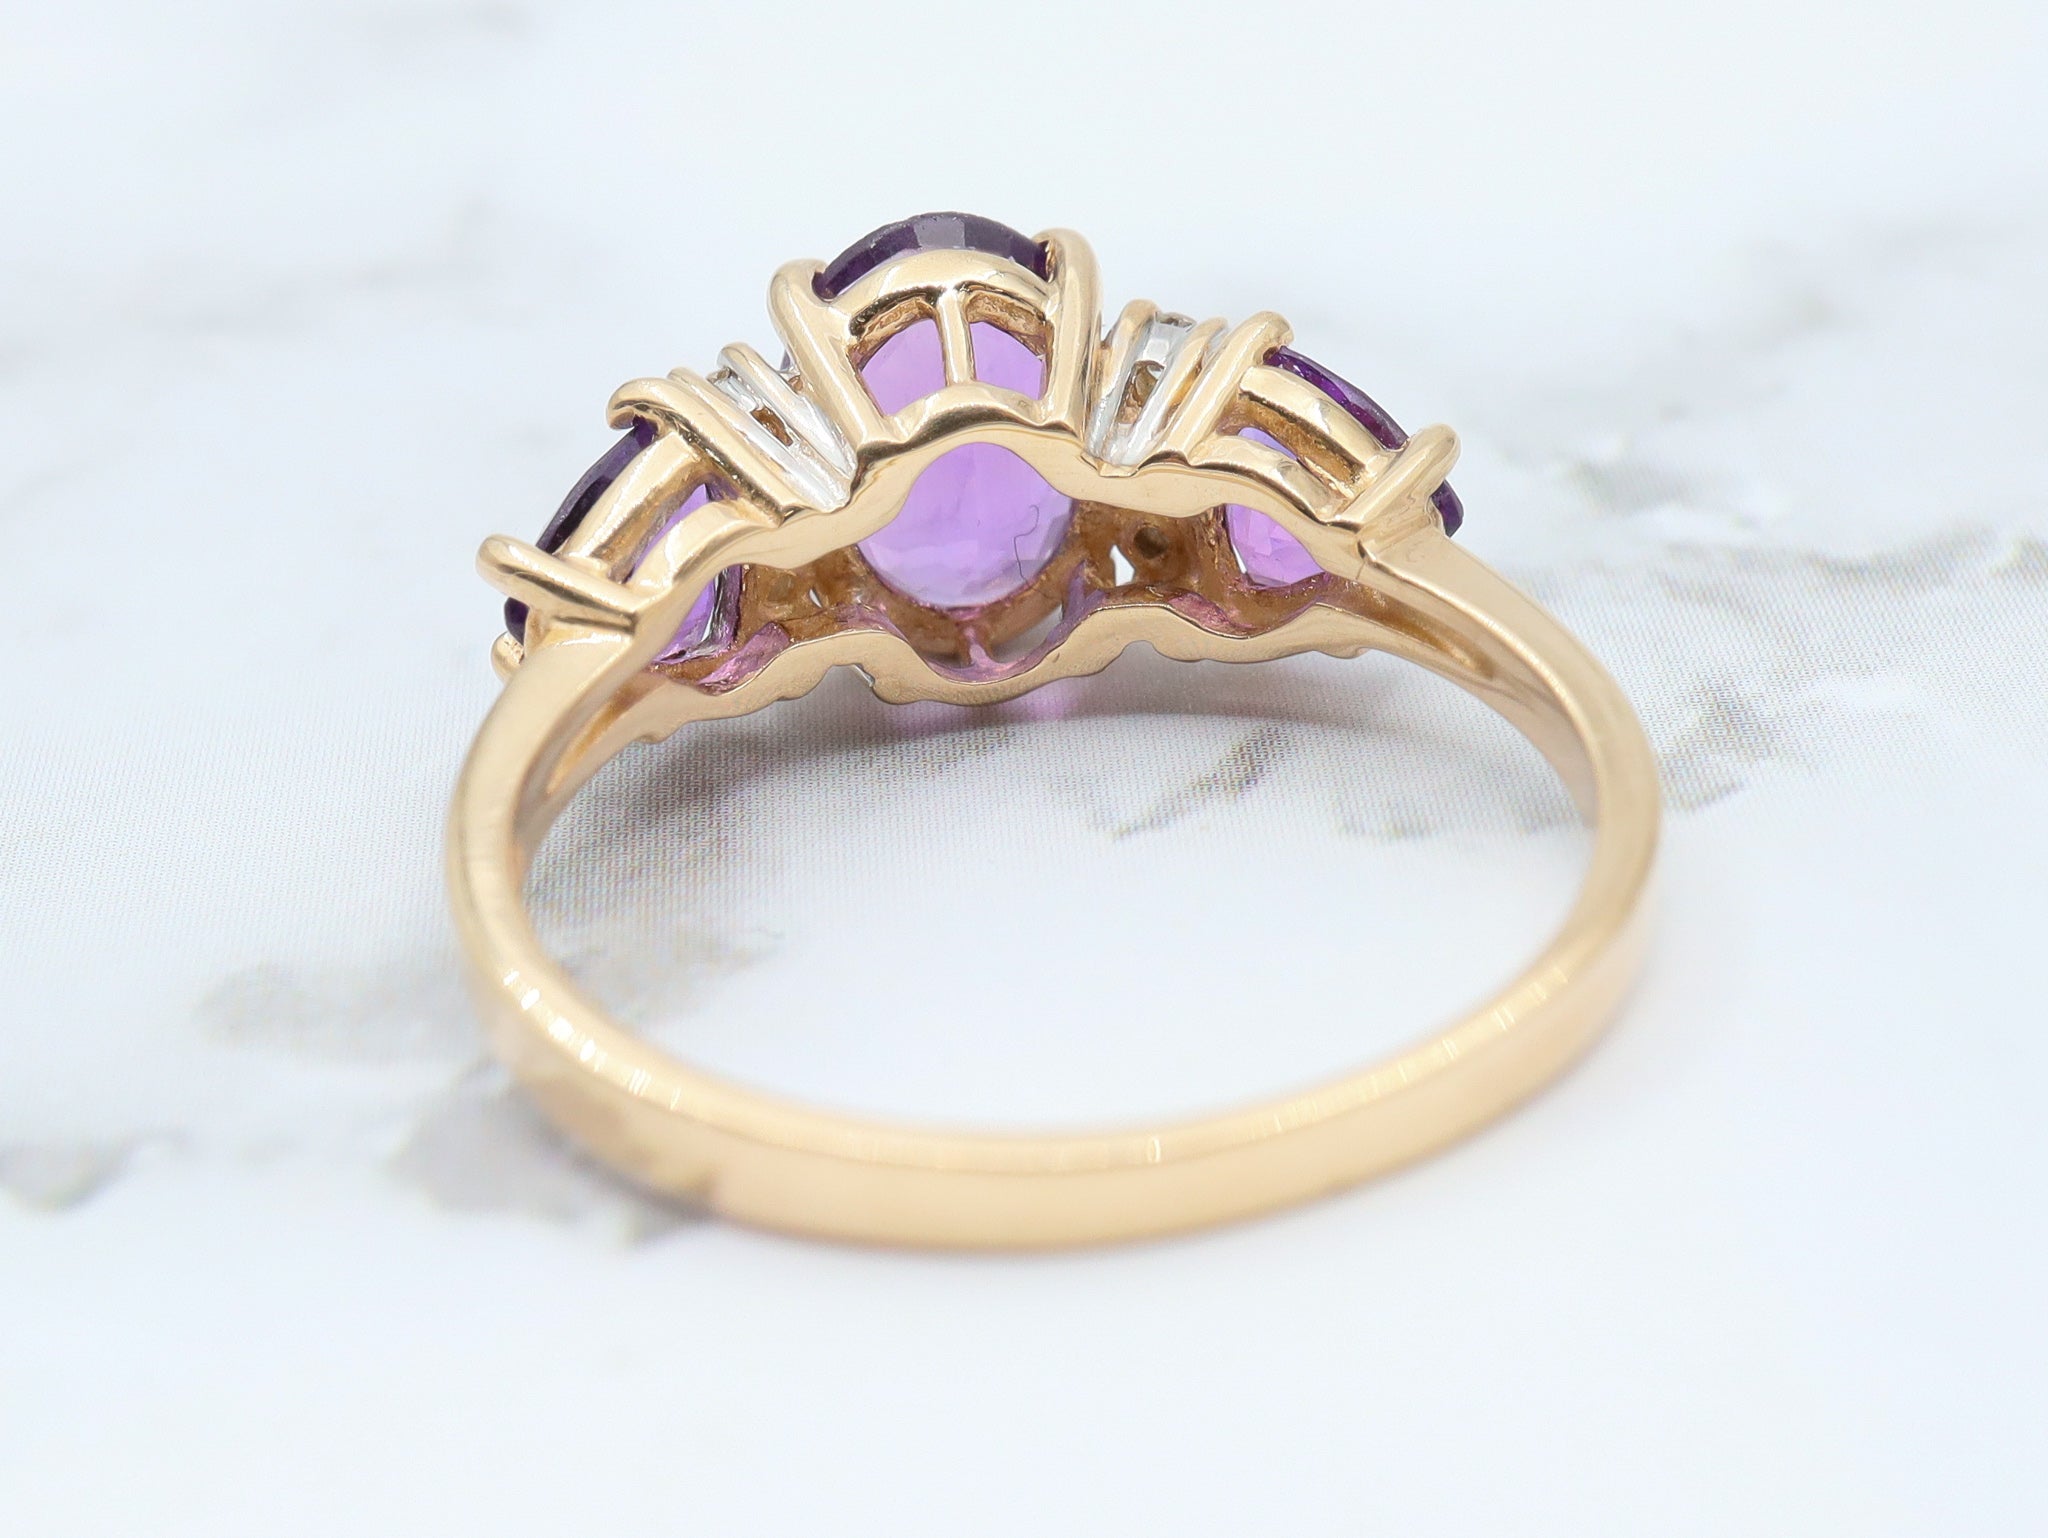 Vintage 14k gold amethyst and diamond cocktail ring size 7